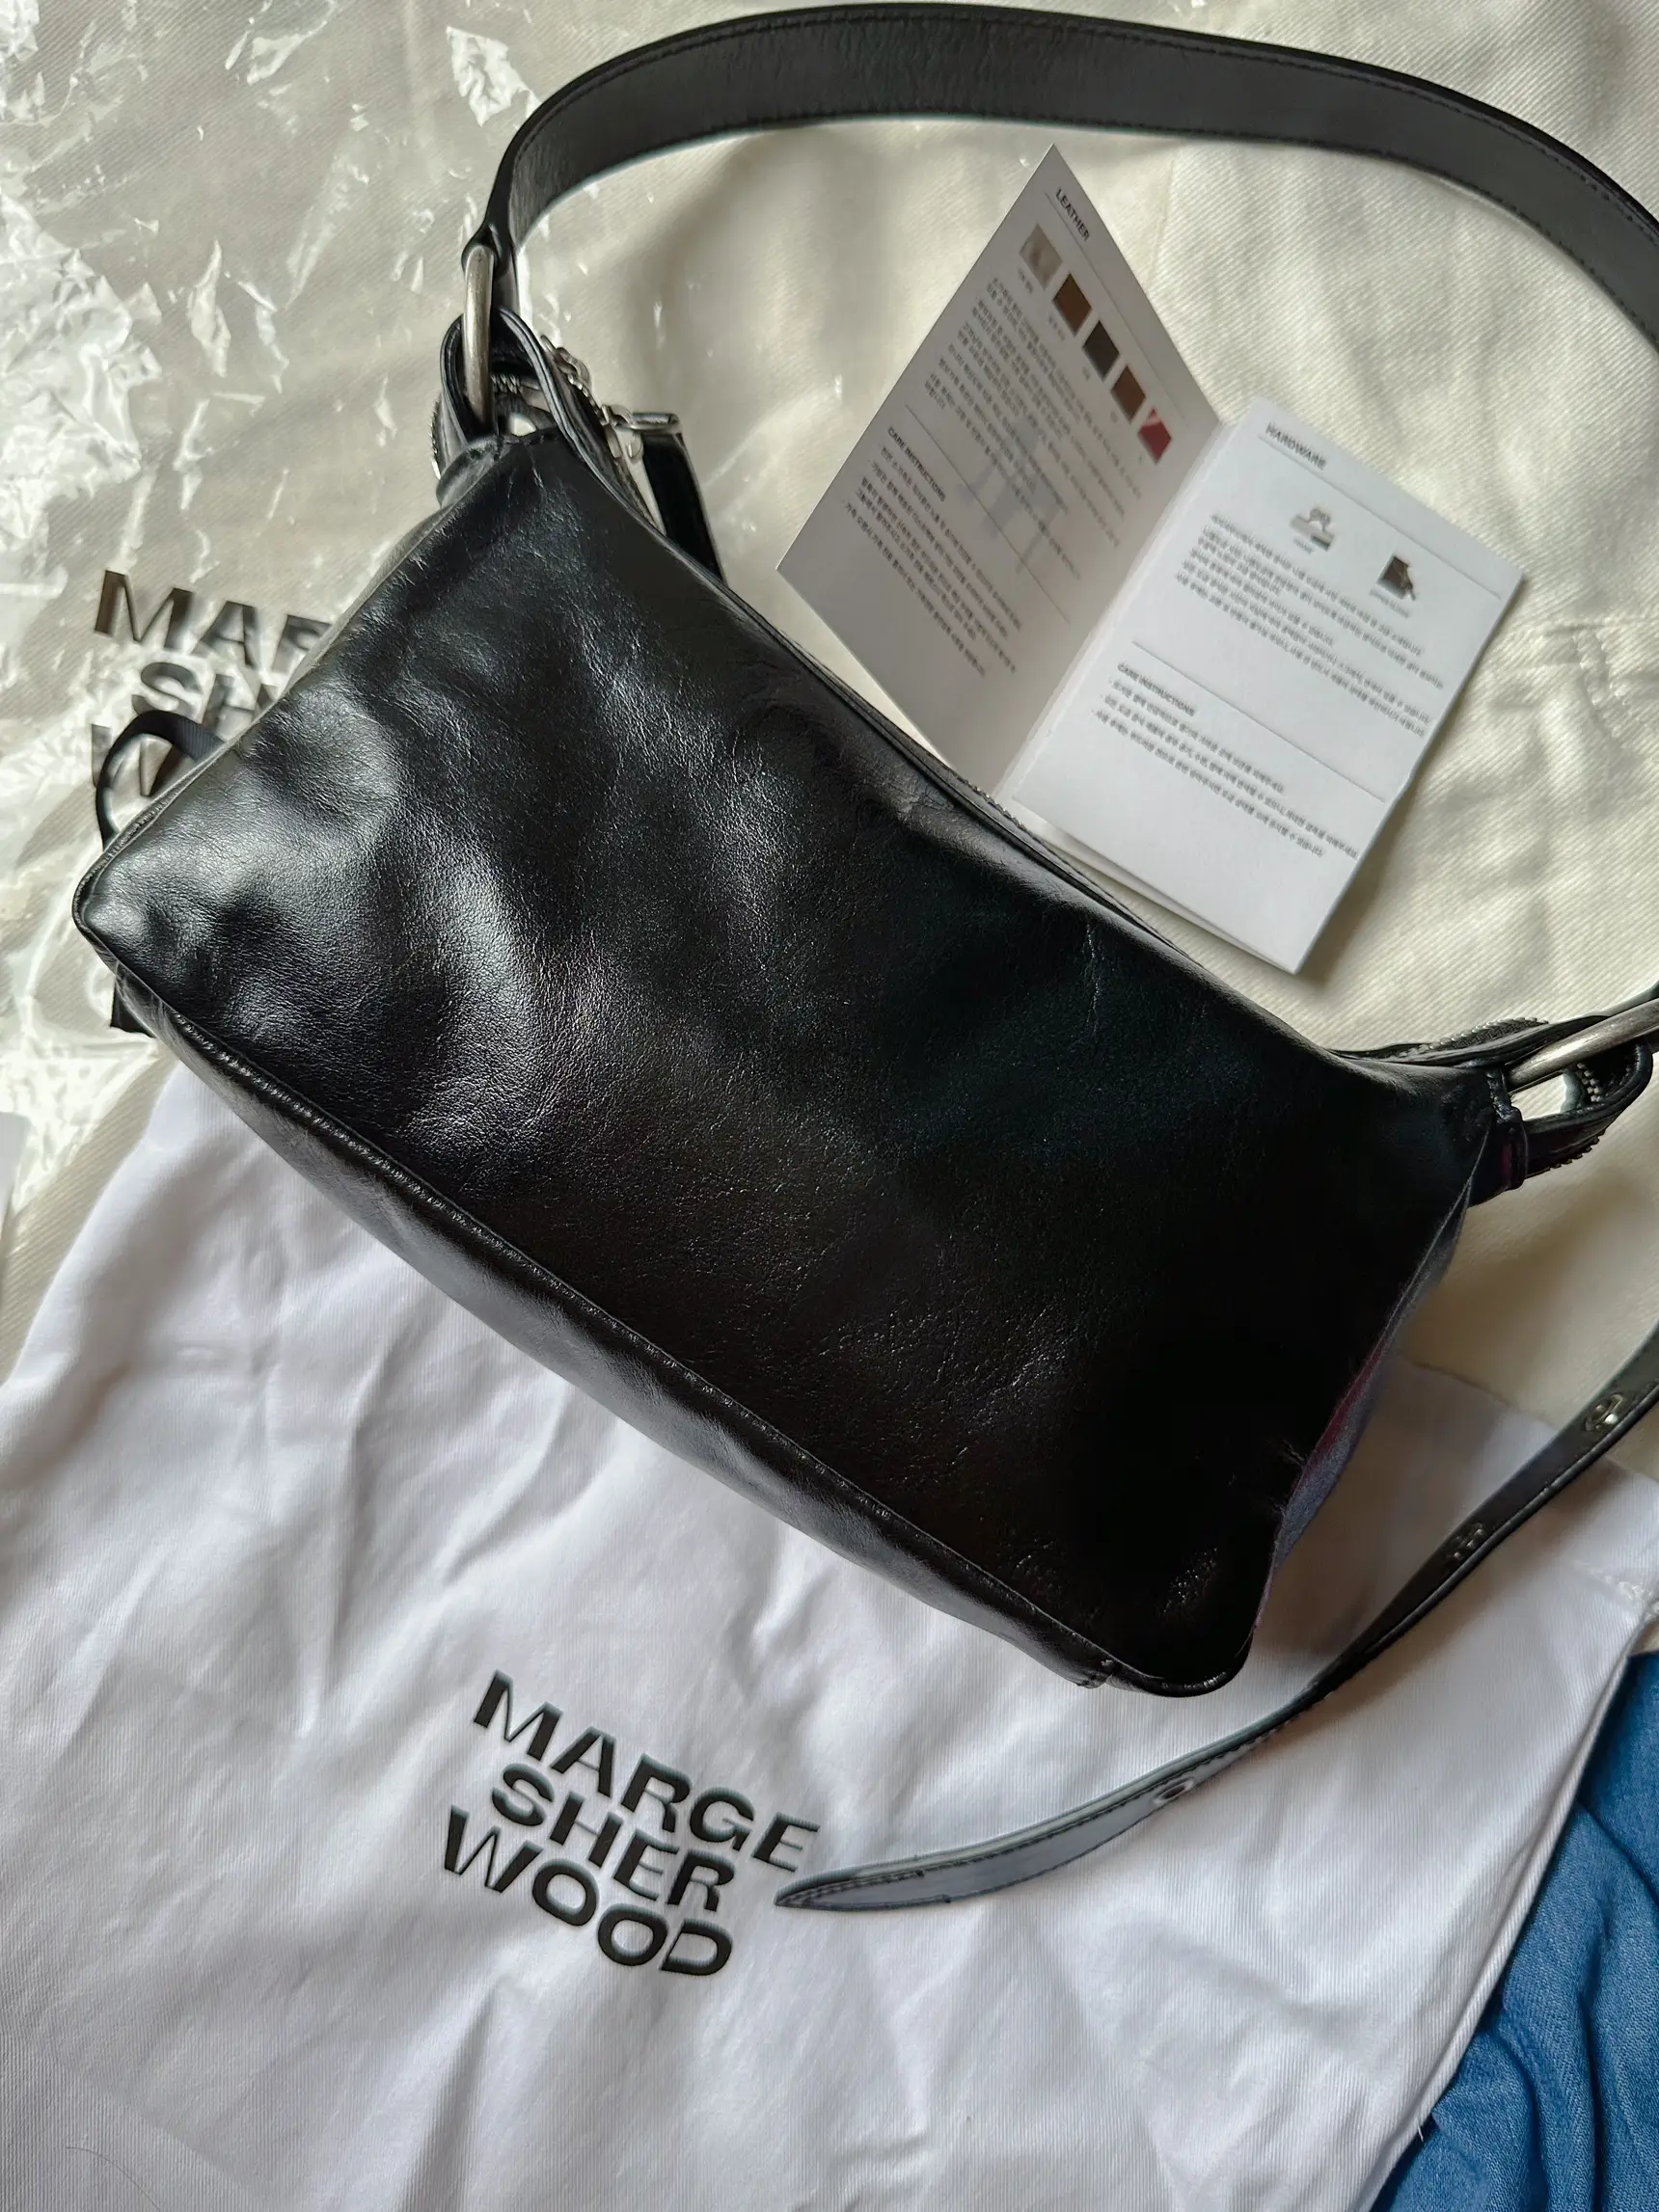 what other brands should i check out? #handbags #margesherwood #unboxi